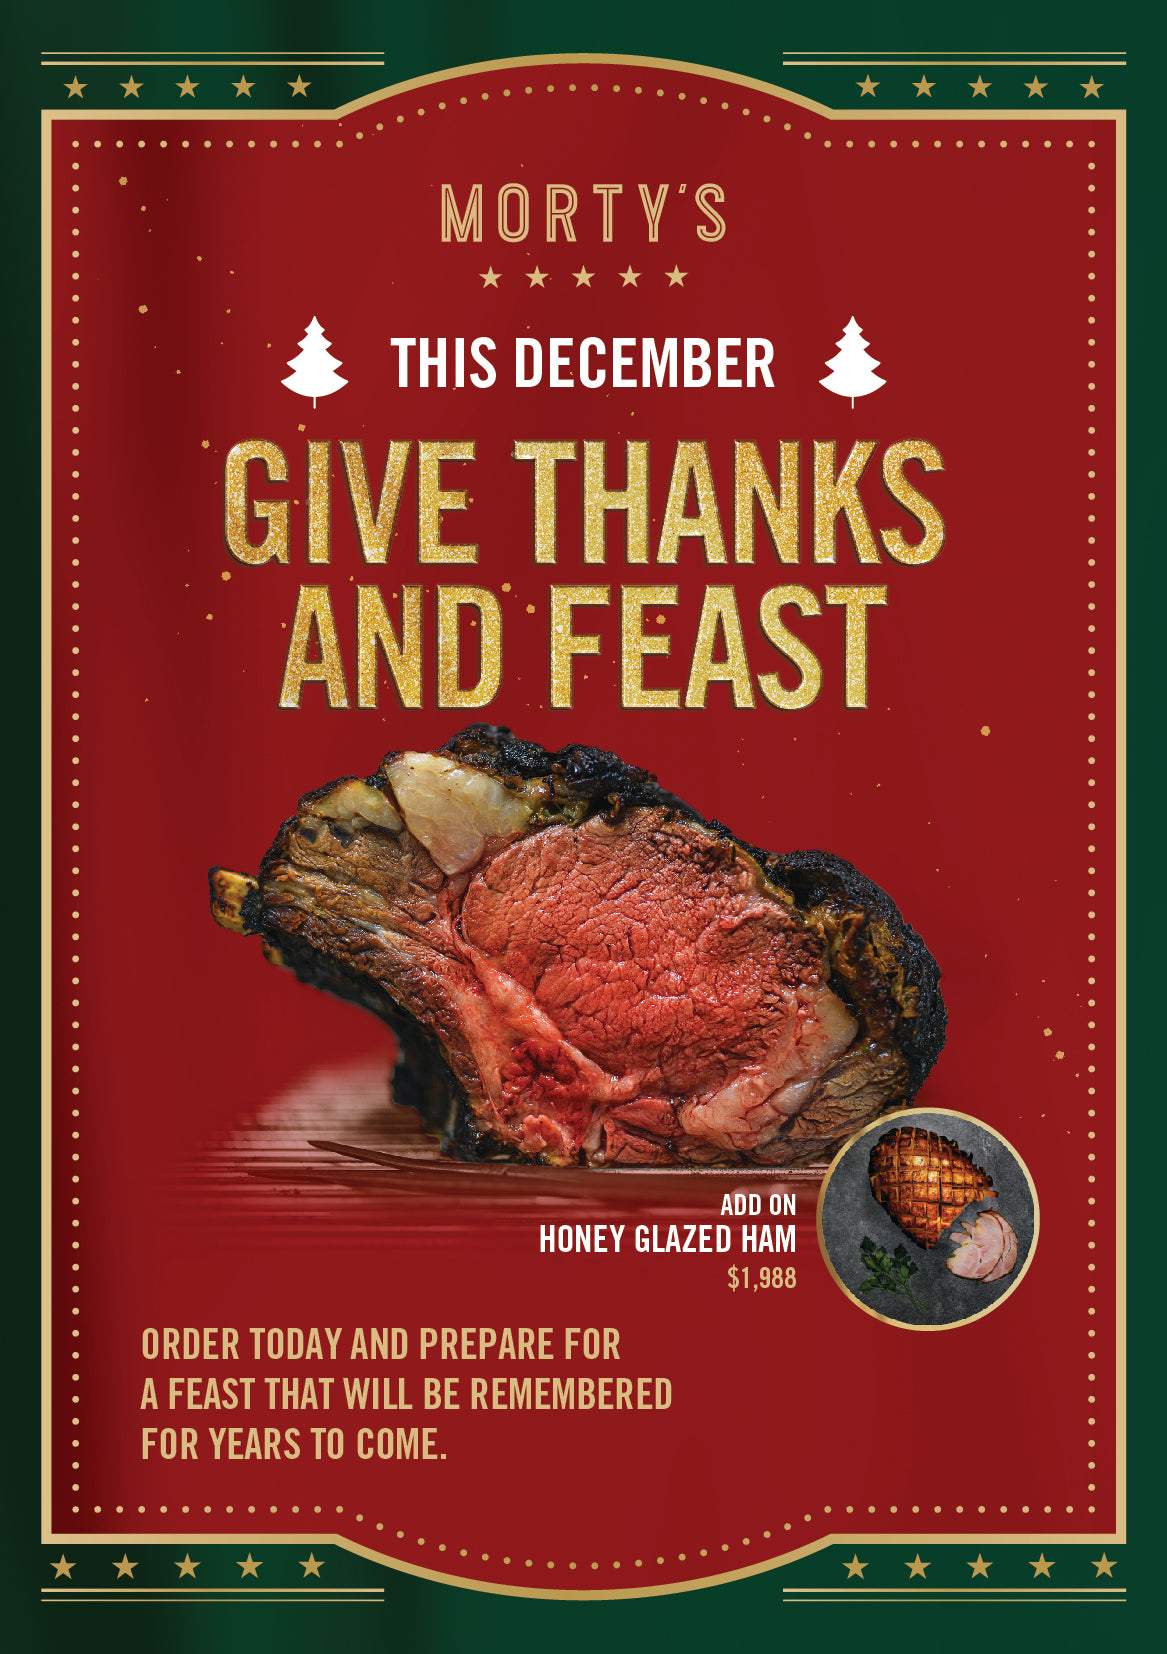 Morty's Prime Rib 'Give Thanks and Feast'